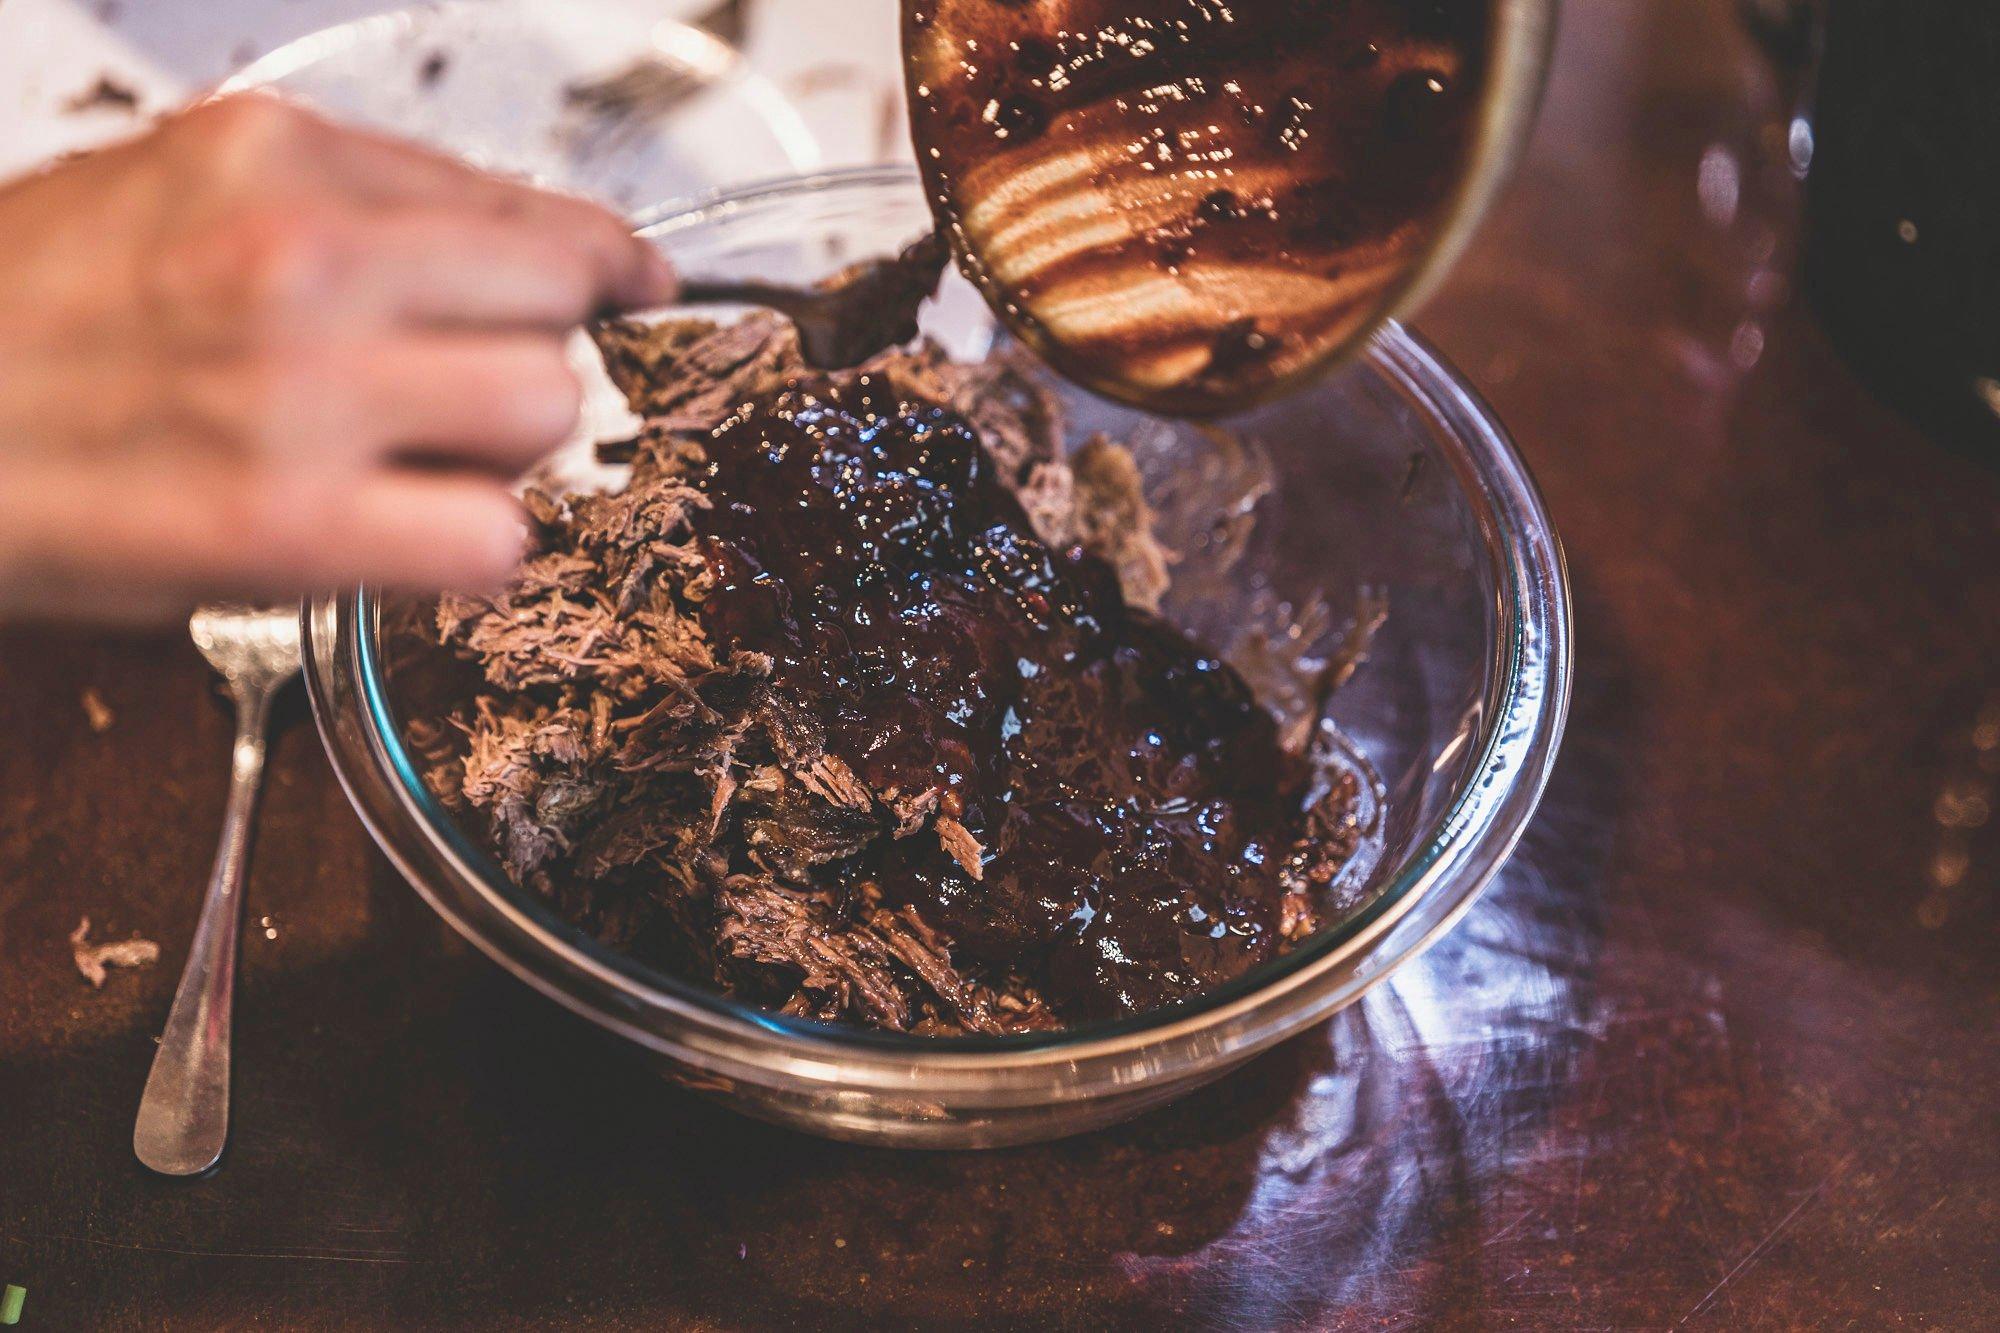 Add the BBQ sauce to the braised meat. Image by Grit Media